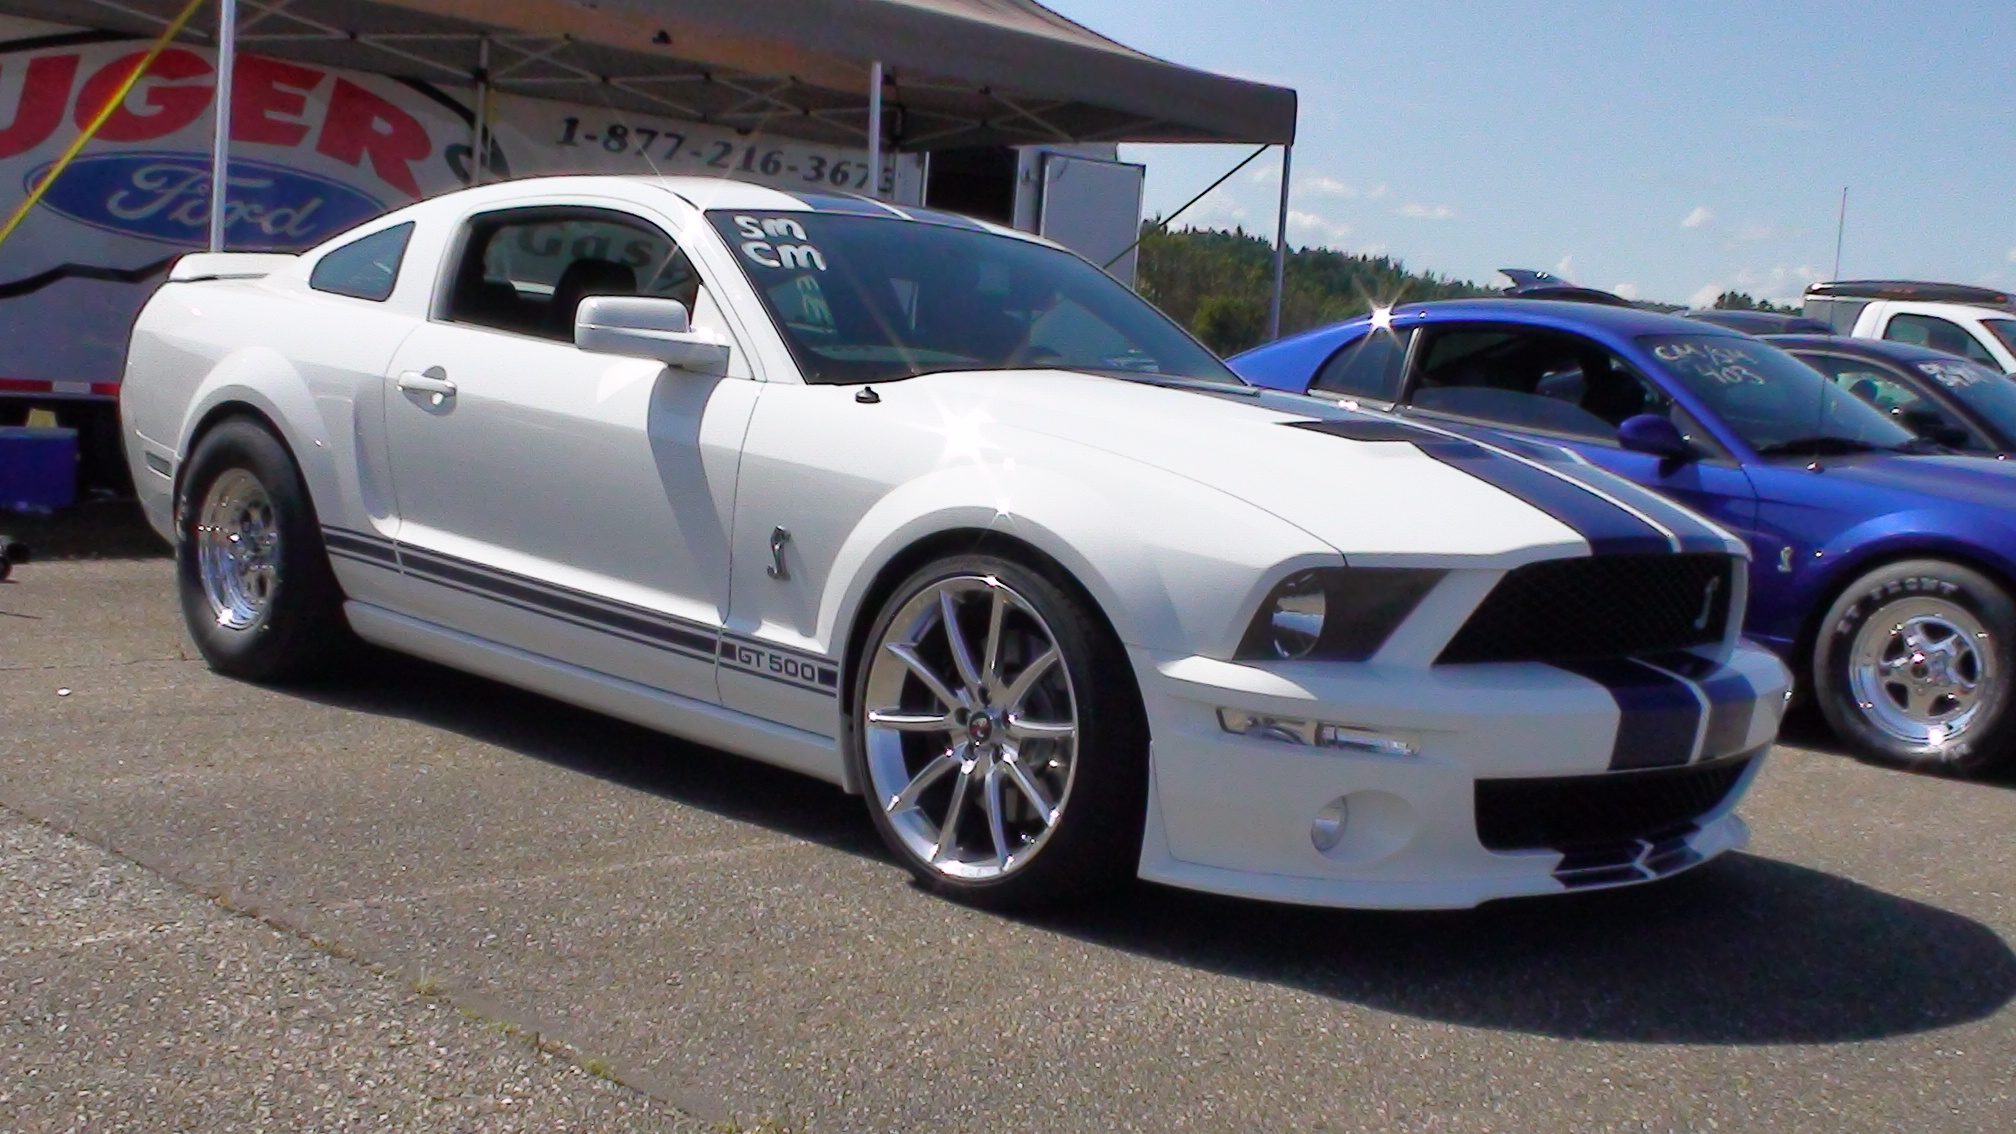 2007 Ford shelby gt 500 quarter mile times #7